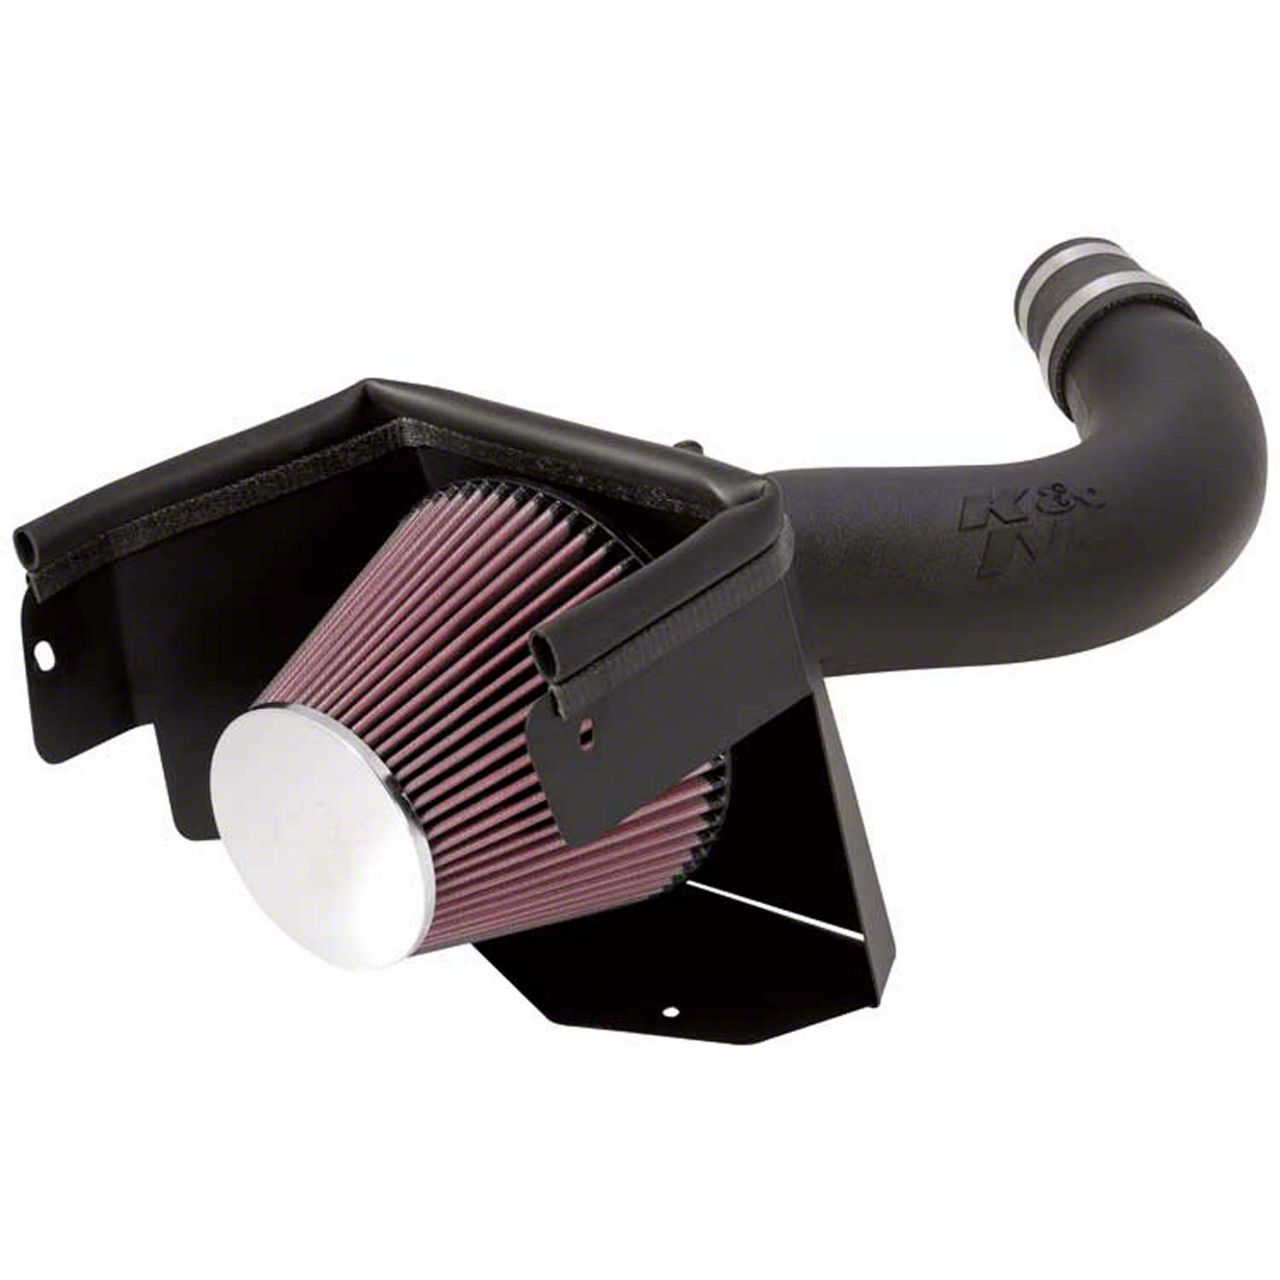 K&N PERFORMANCE COLD AIR INTAKE SYSTEM FOR 07-11 JEEP WRANGLER 3.8L 